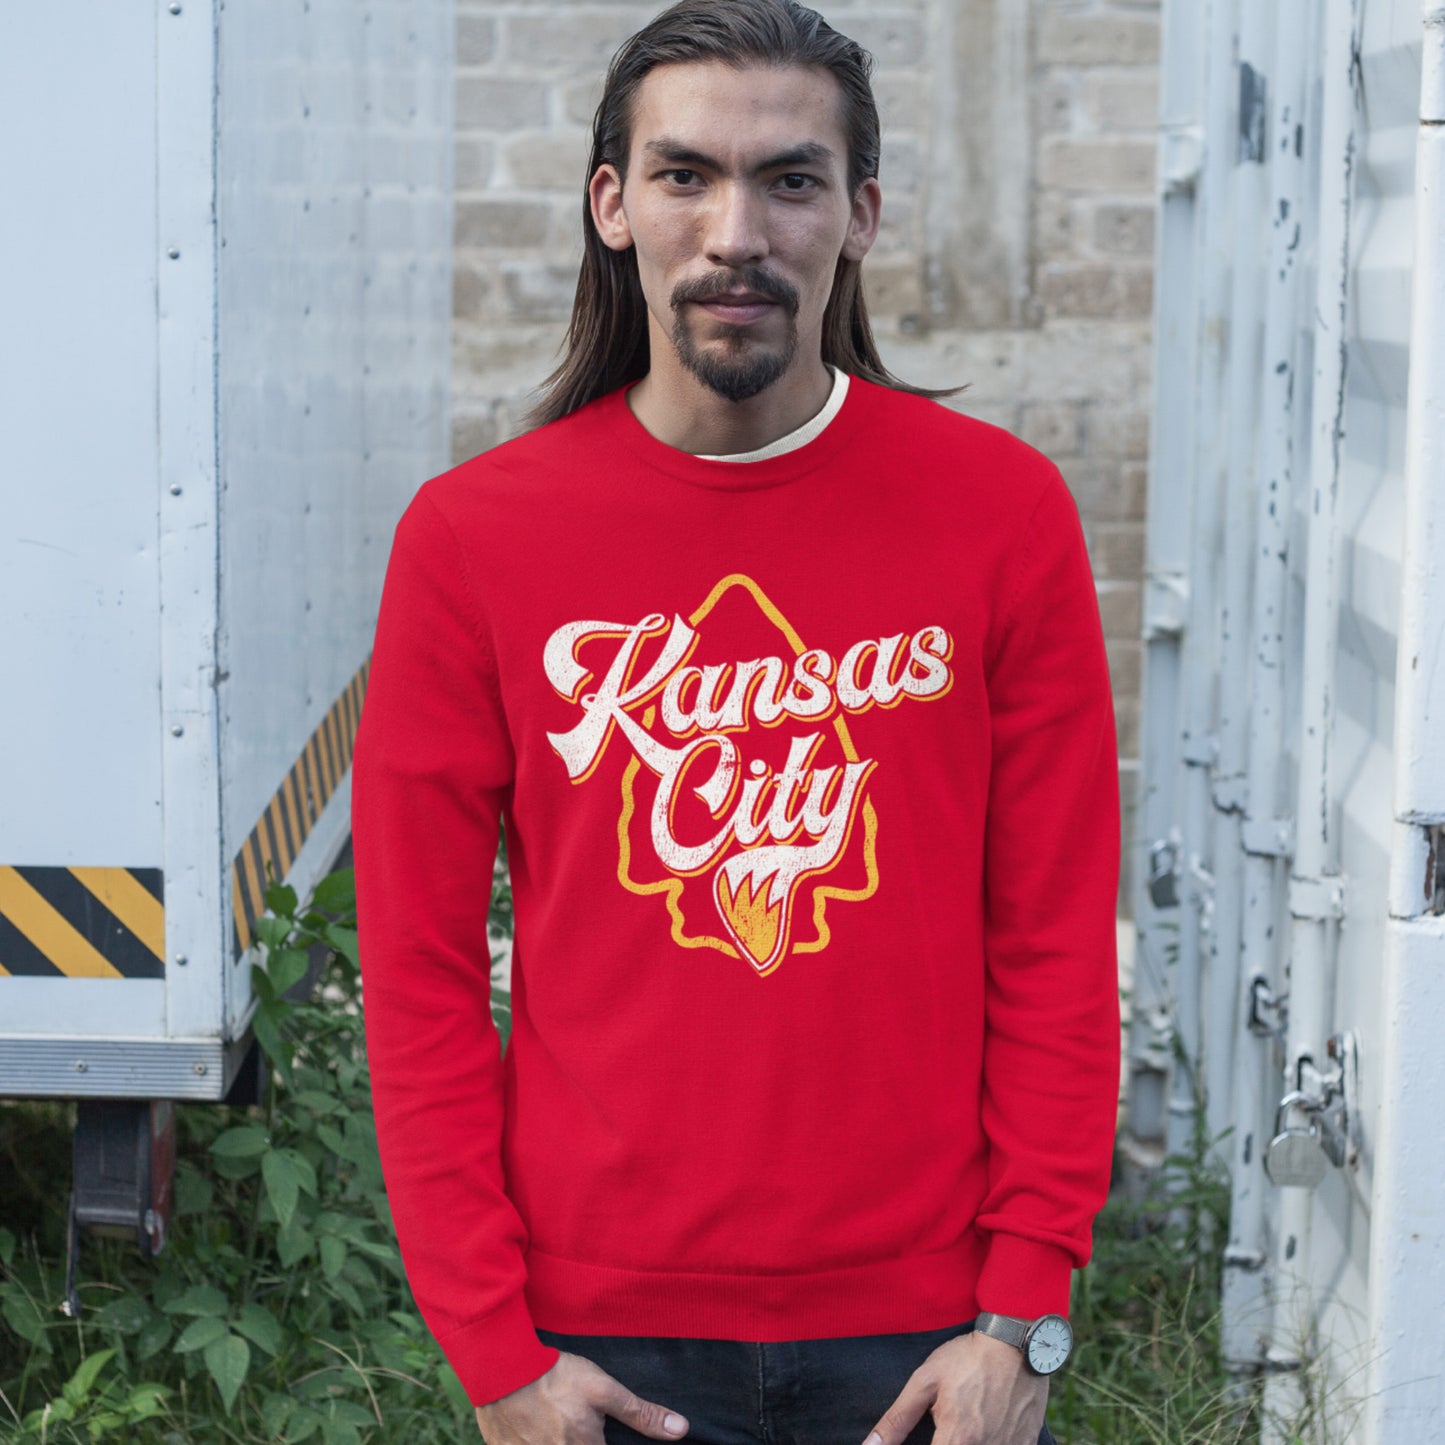 KC Swag Kansas City Chiefs Distressed White & Gold Wolftail KC on a Red Crewneck Sweatshirt worn by a skinny male model standing in a field near white shipping containers